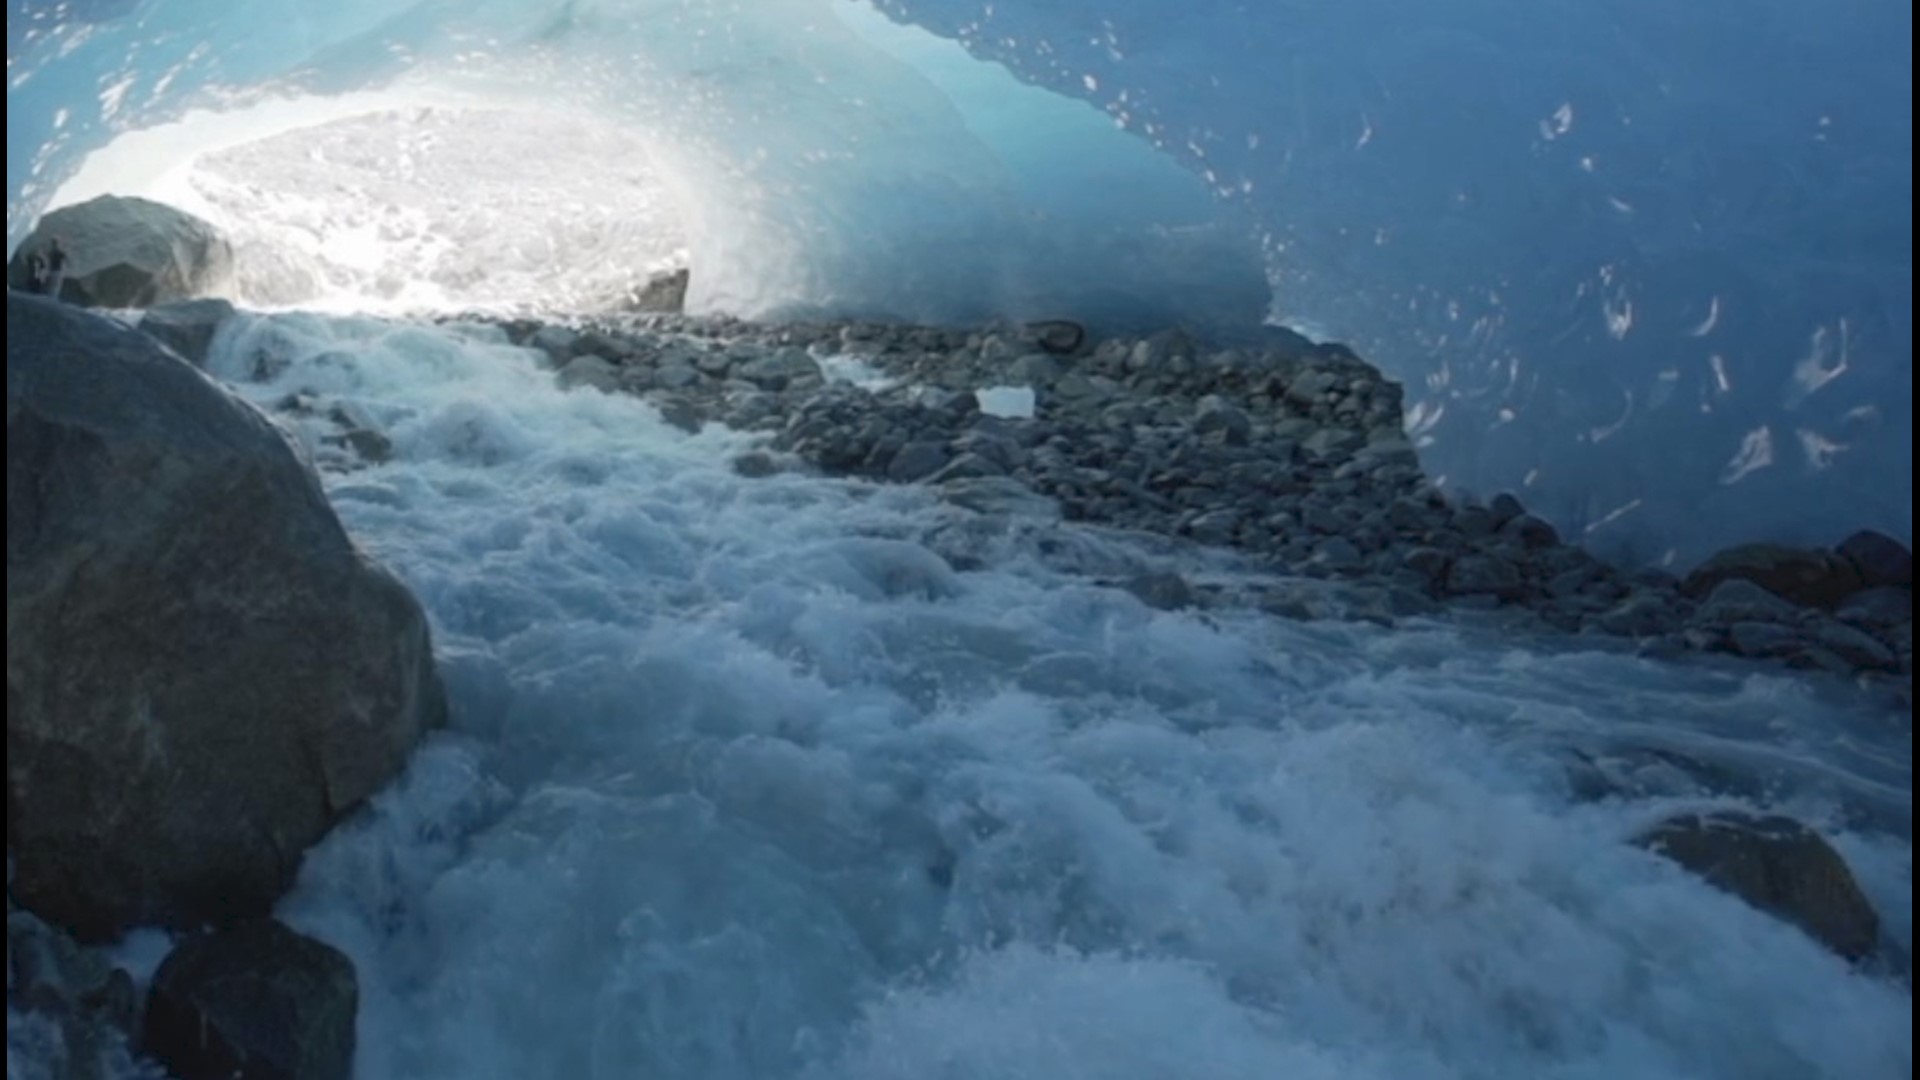 Global warming is speeding up glacial melt, but now the glaciers are speeding it up, as well.